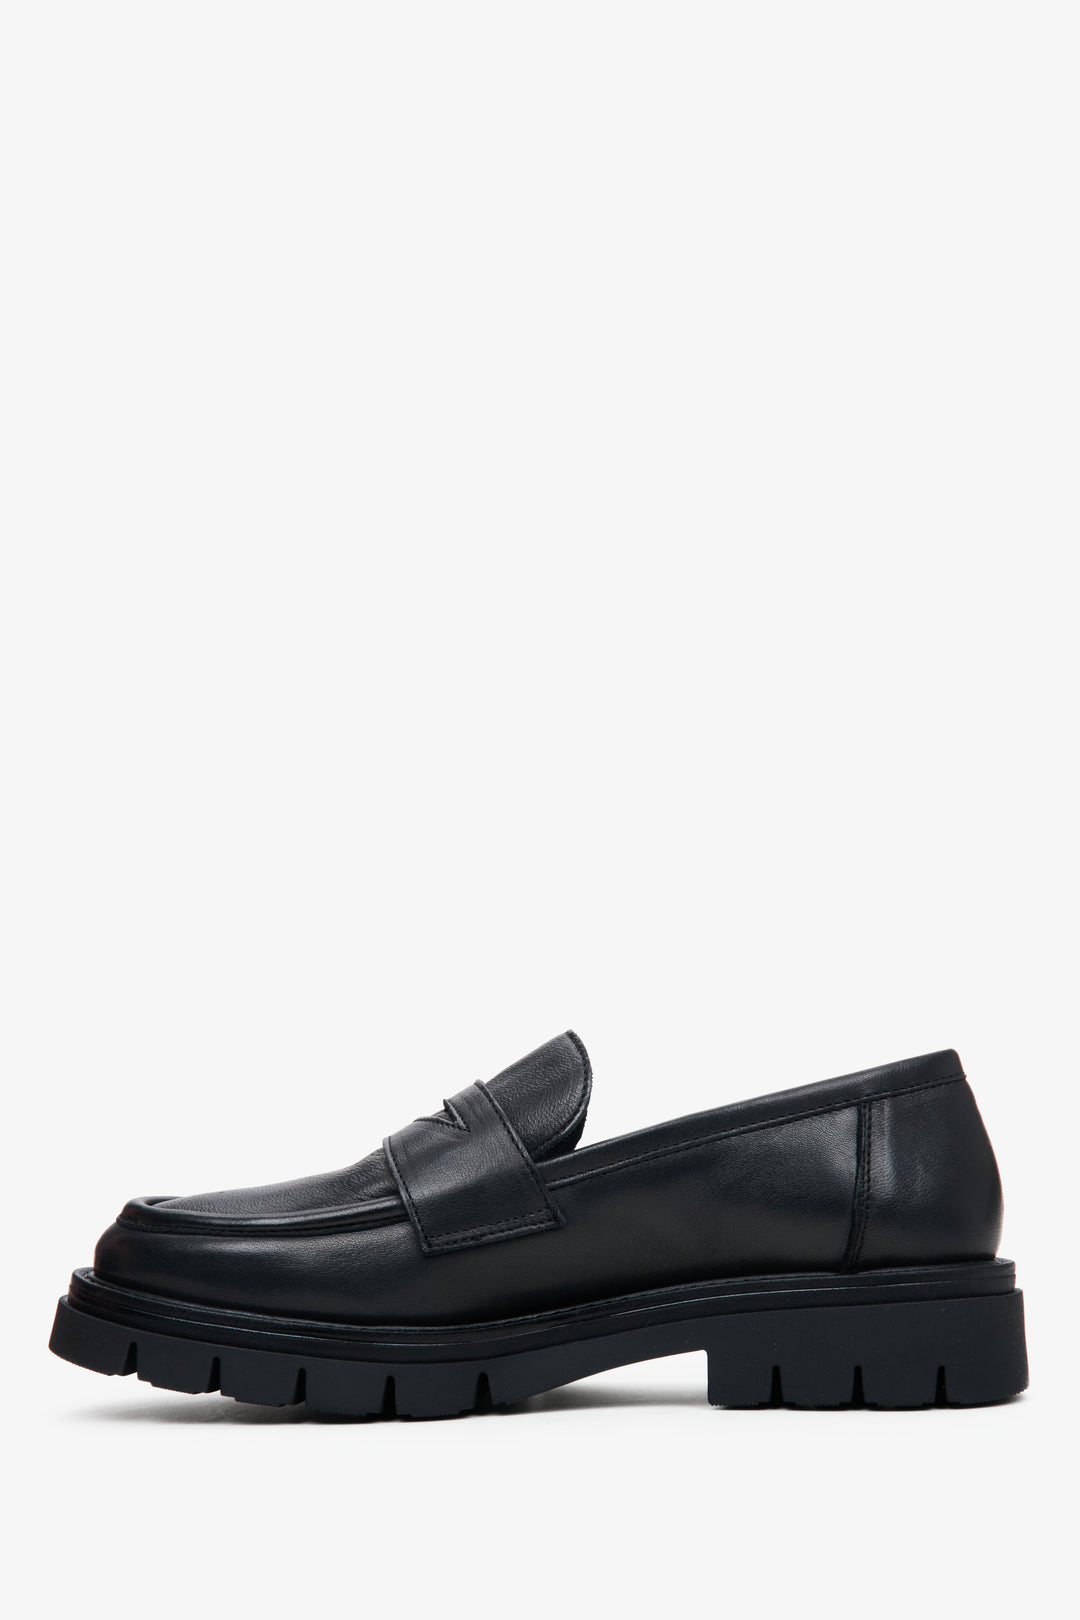 Women's black loafers with a stable Italian made sole - shoe profile.